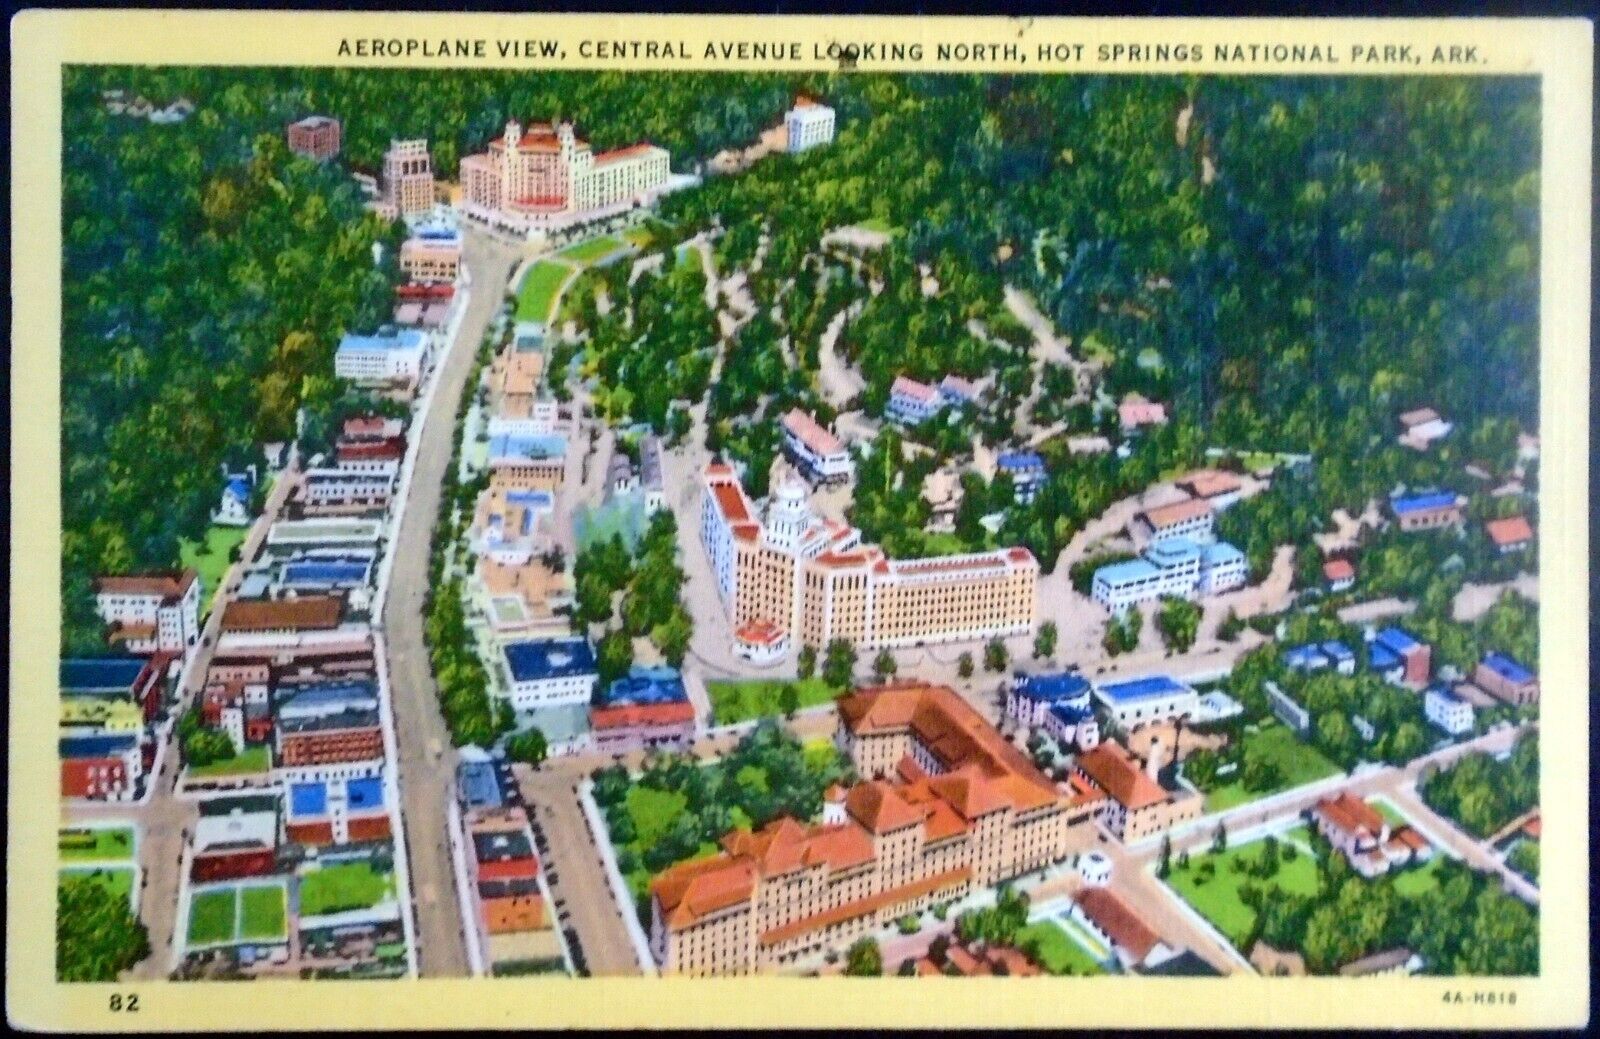 1934 Aeroplane View, Central Avenue Looking North, Hot Springs National Park, AR